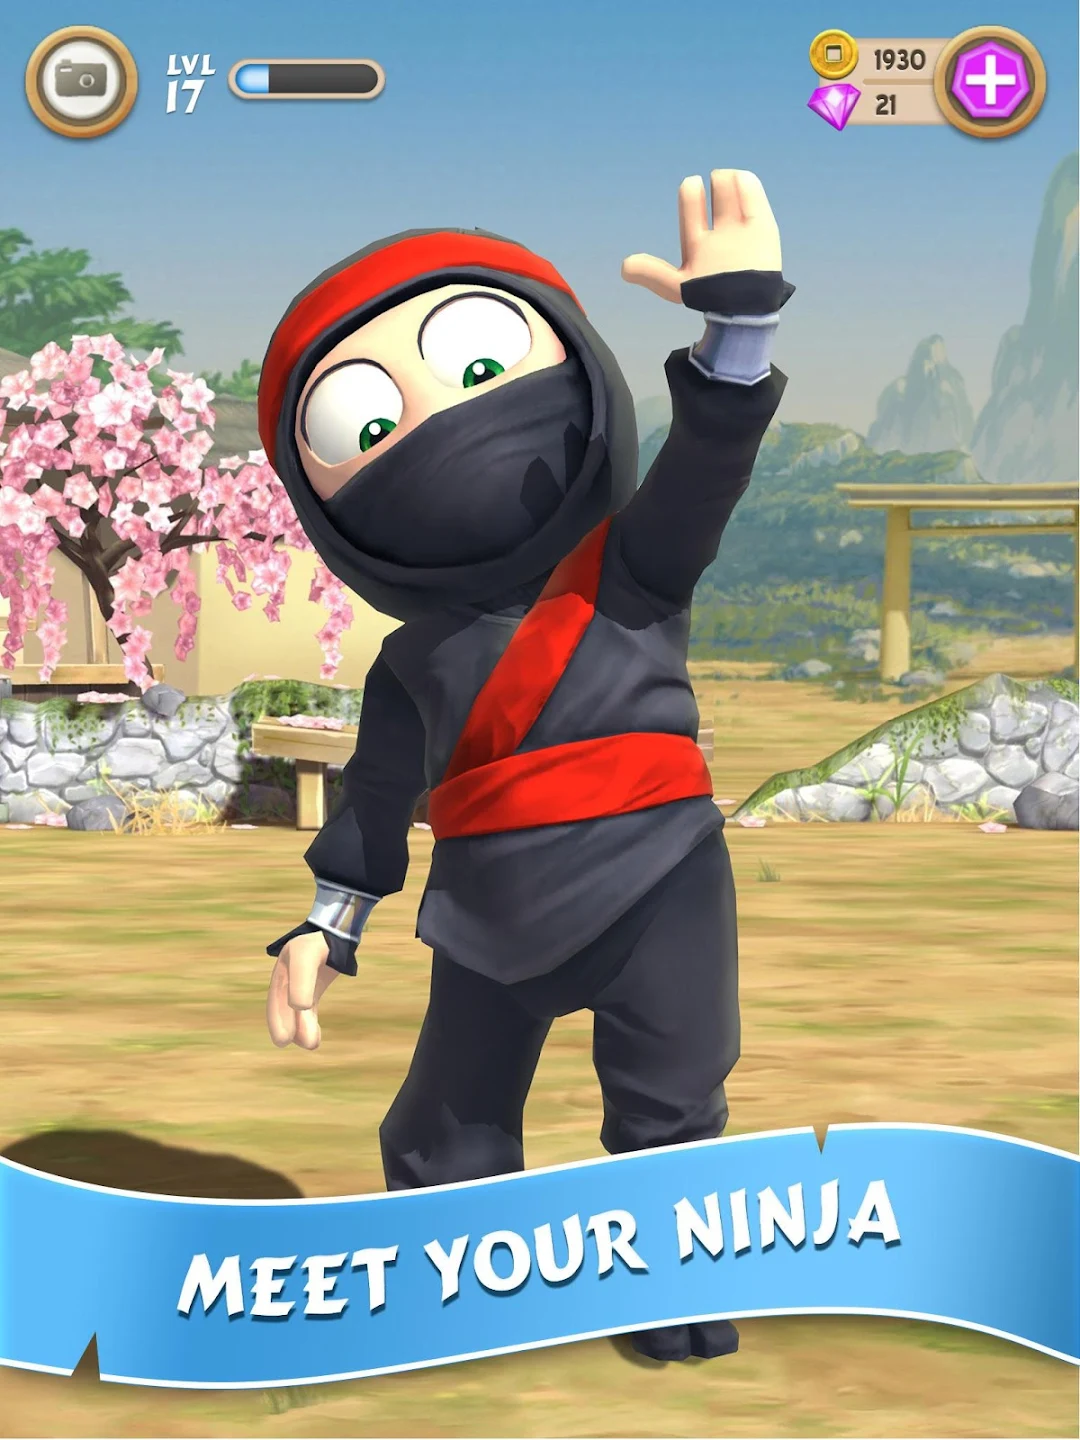 Clumsy ninja download pc microsoft store software download